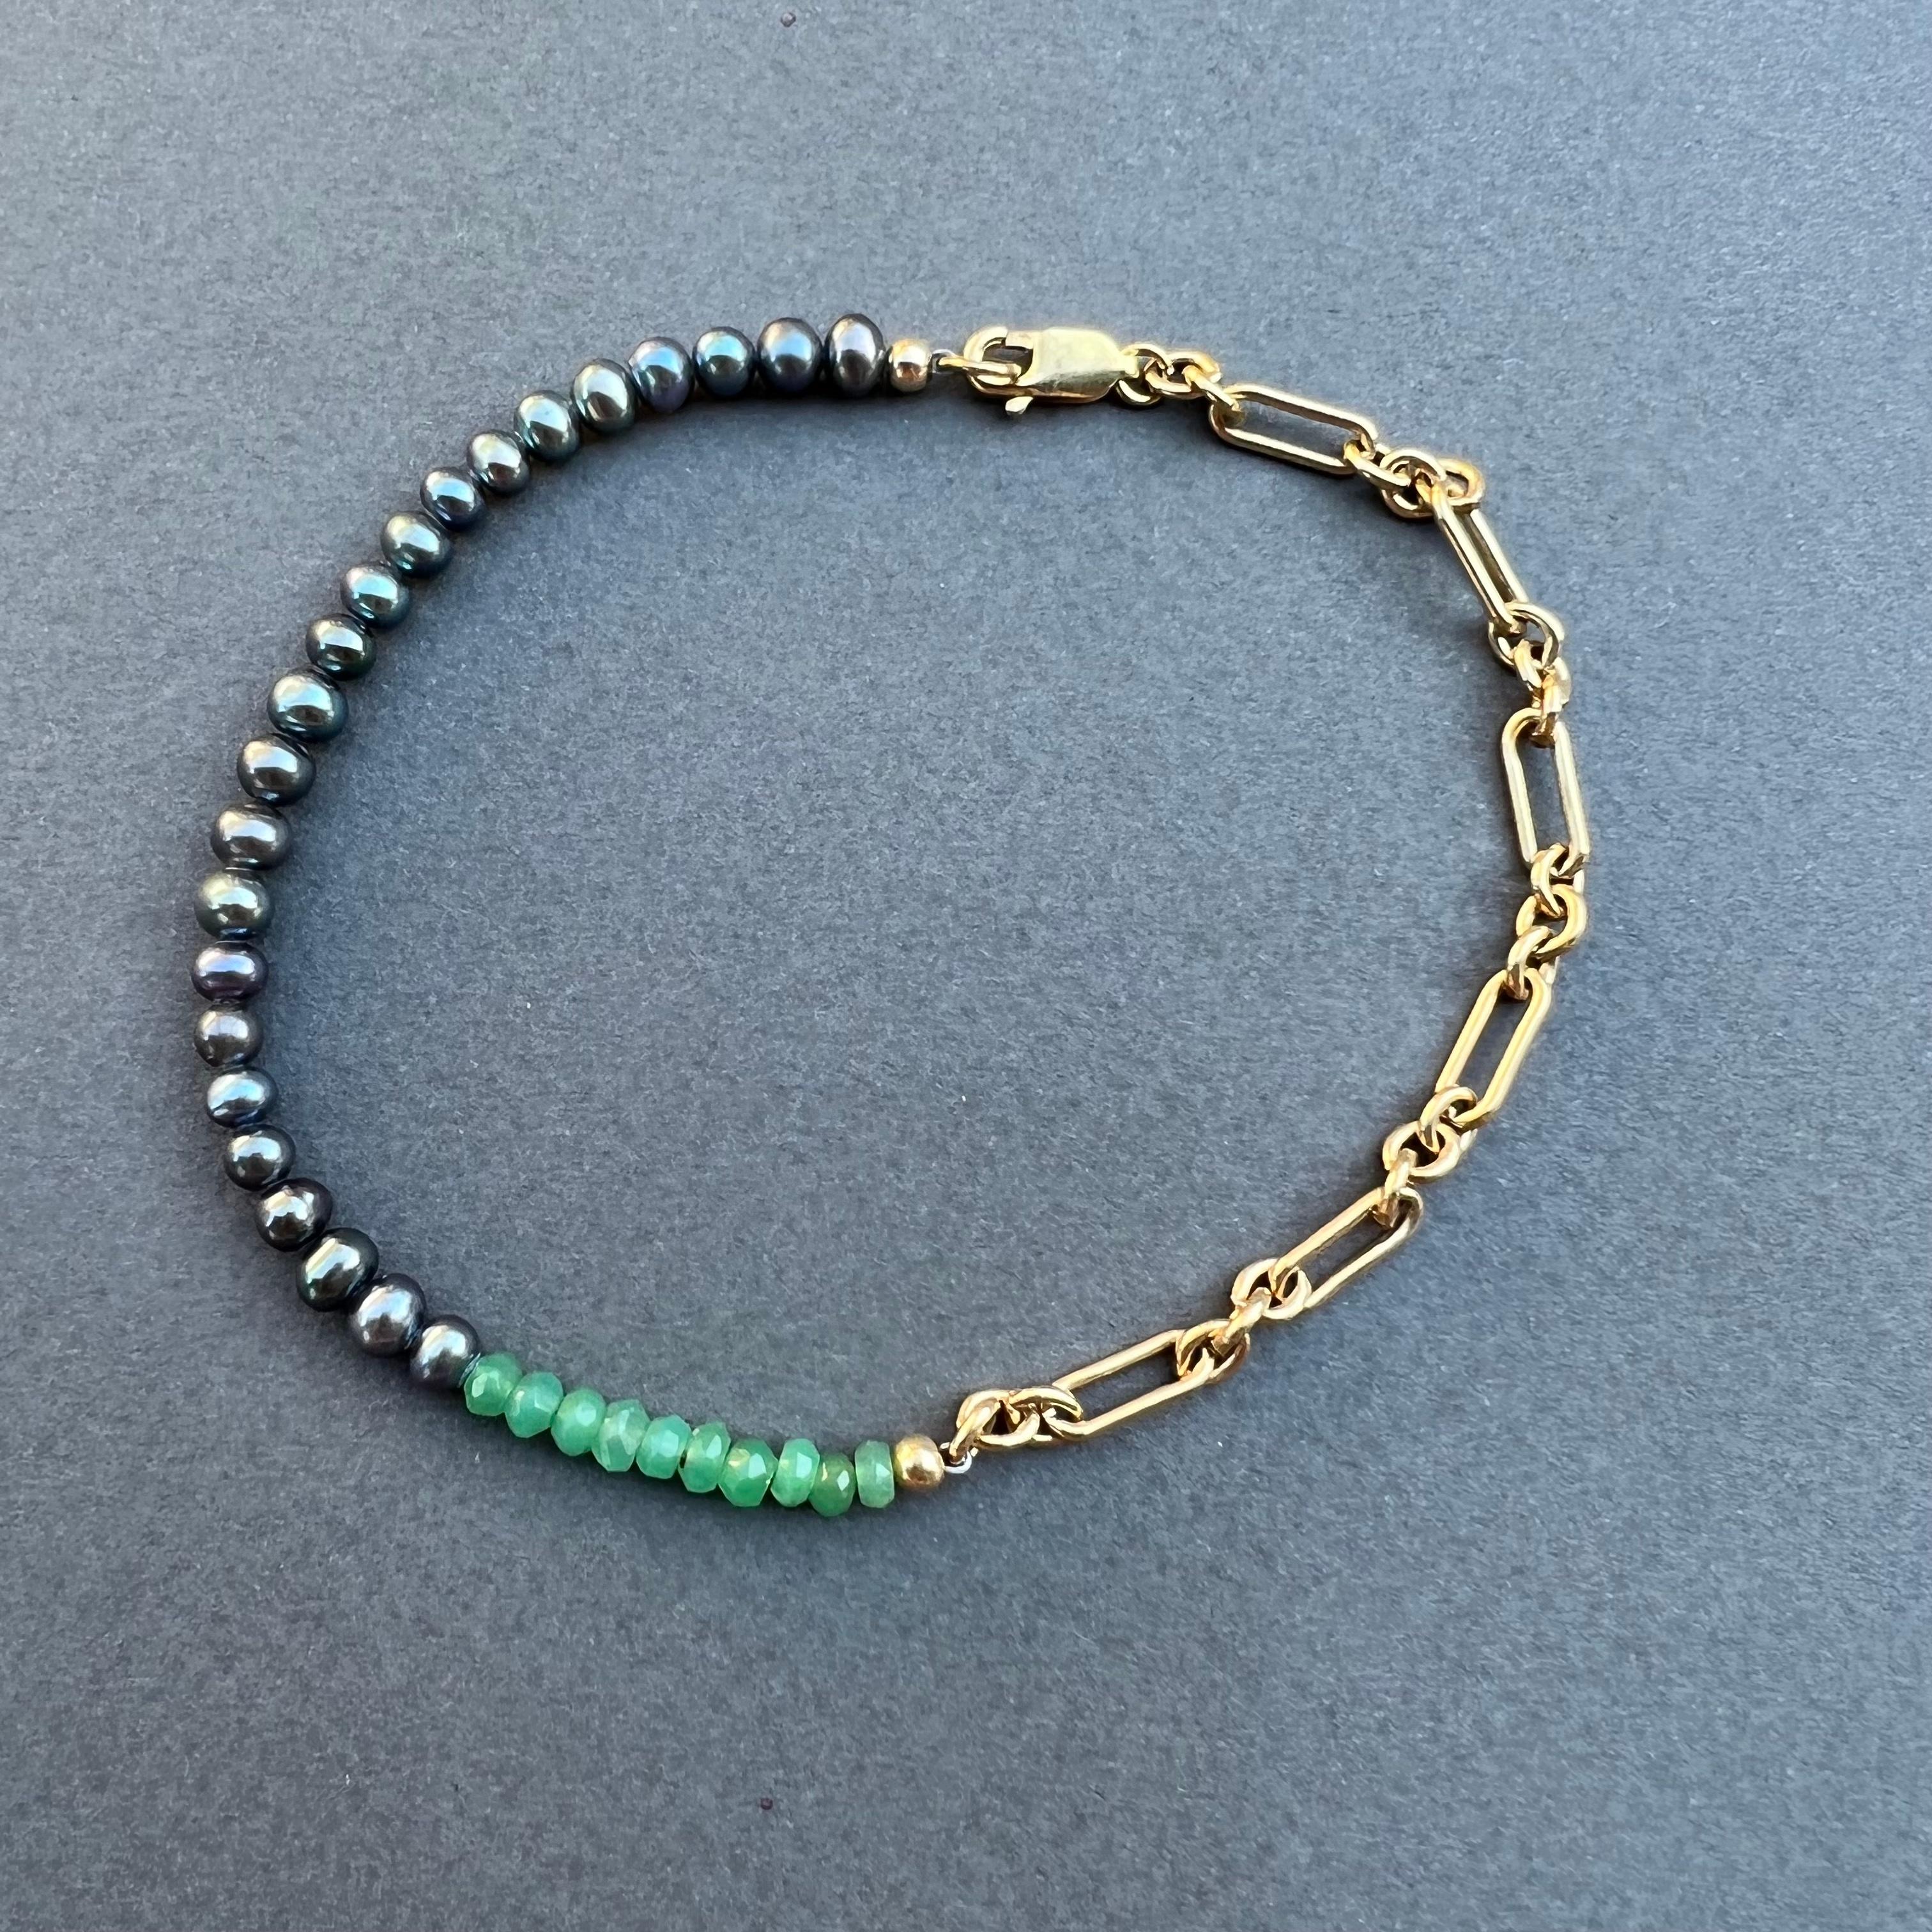 Black Pearl Ankle Bracelet Gold Filled Chain Chrysoprase J Dauphin For Sale 1